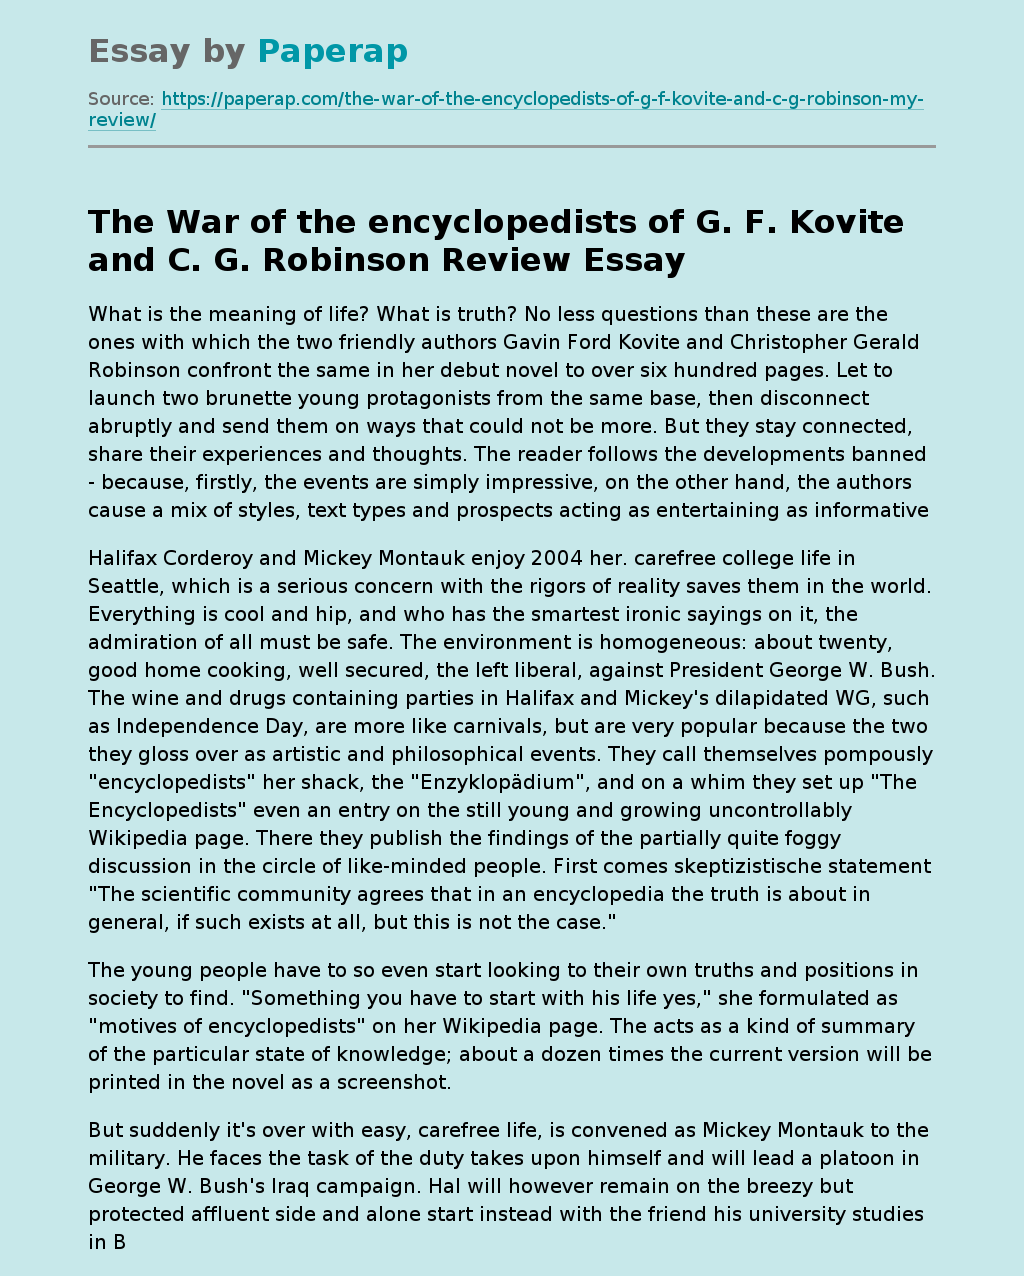 The War of the encyclopedists of G. F. Kovite and C. G. Robinson Review